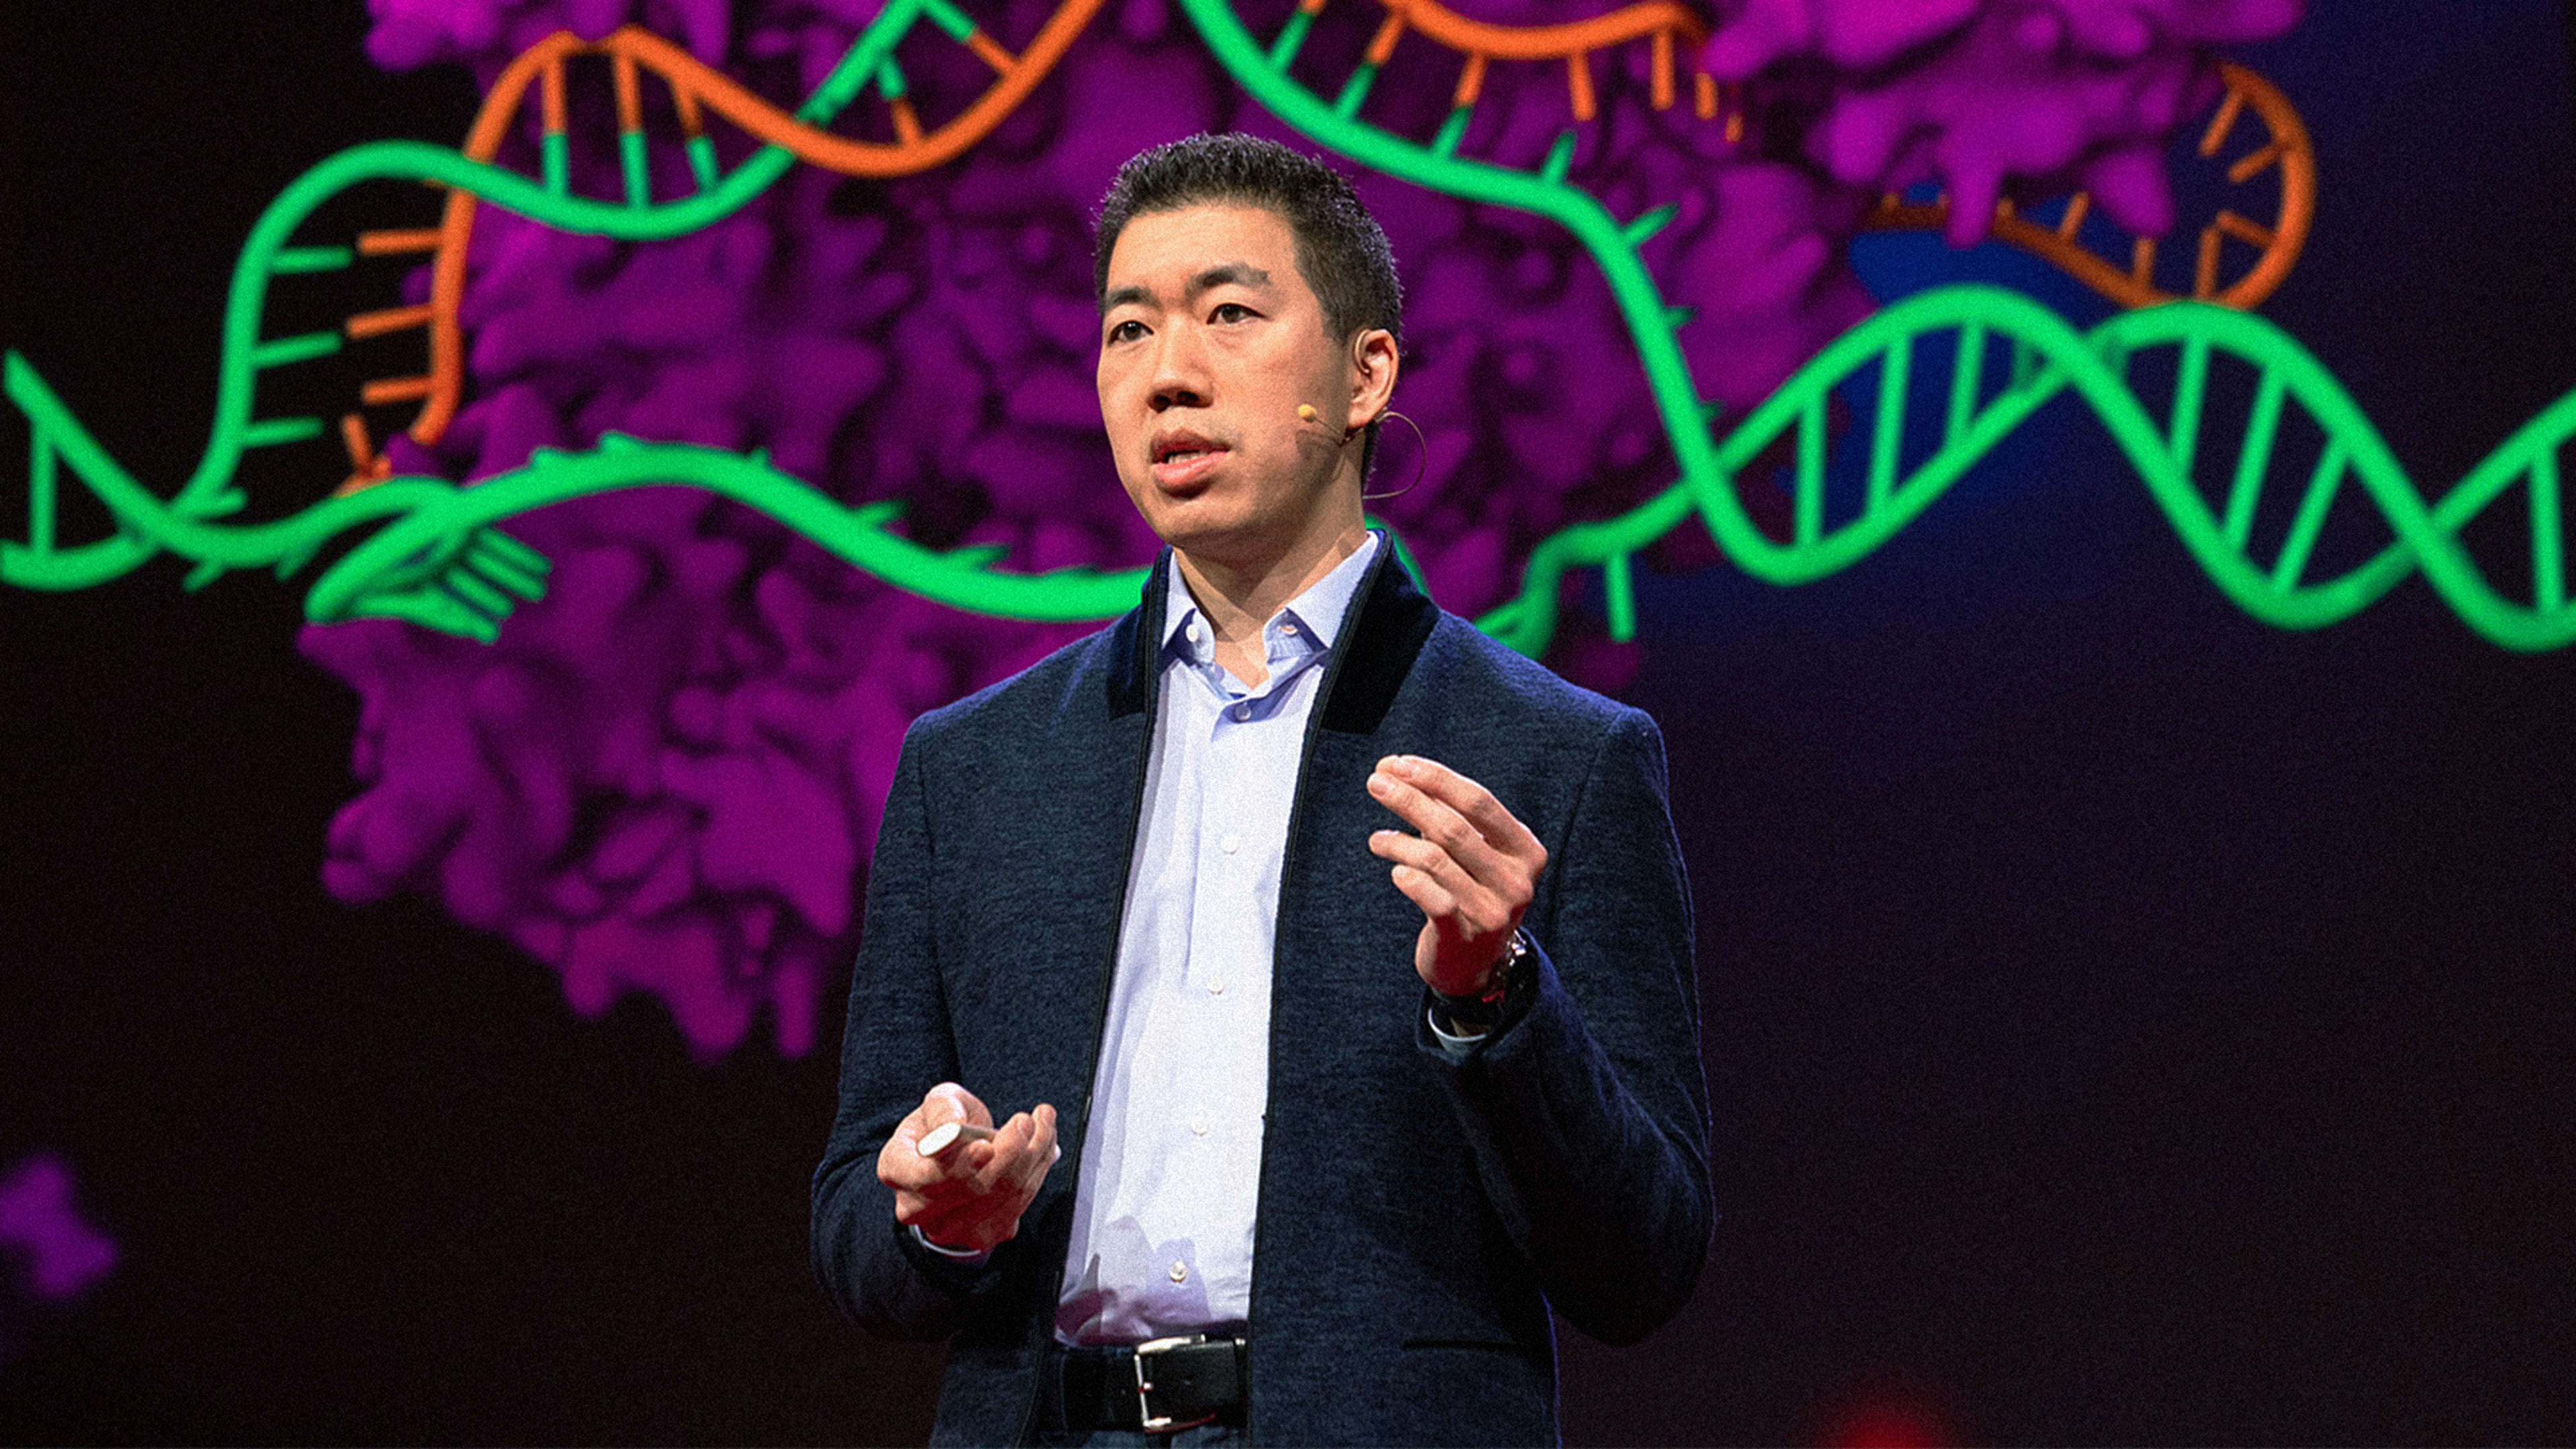 This new gene-editing method means scientists are closer to reshaping our DNA to cure disease